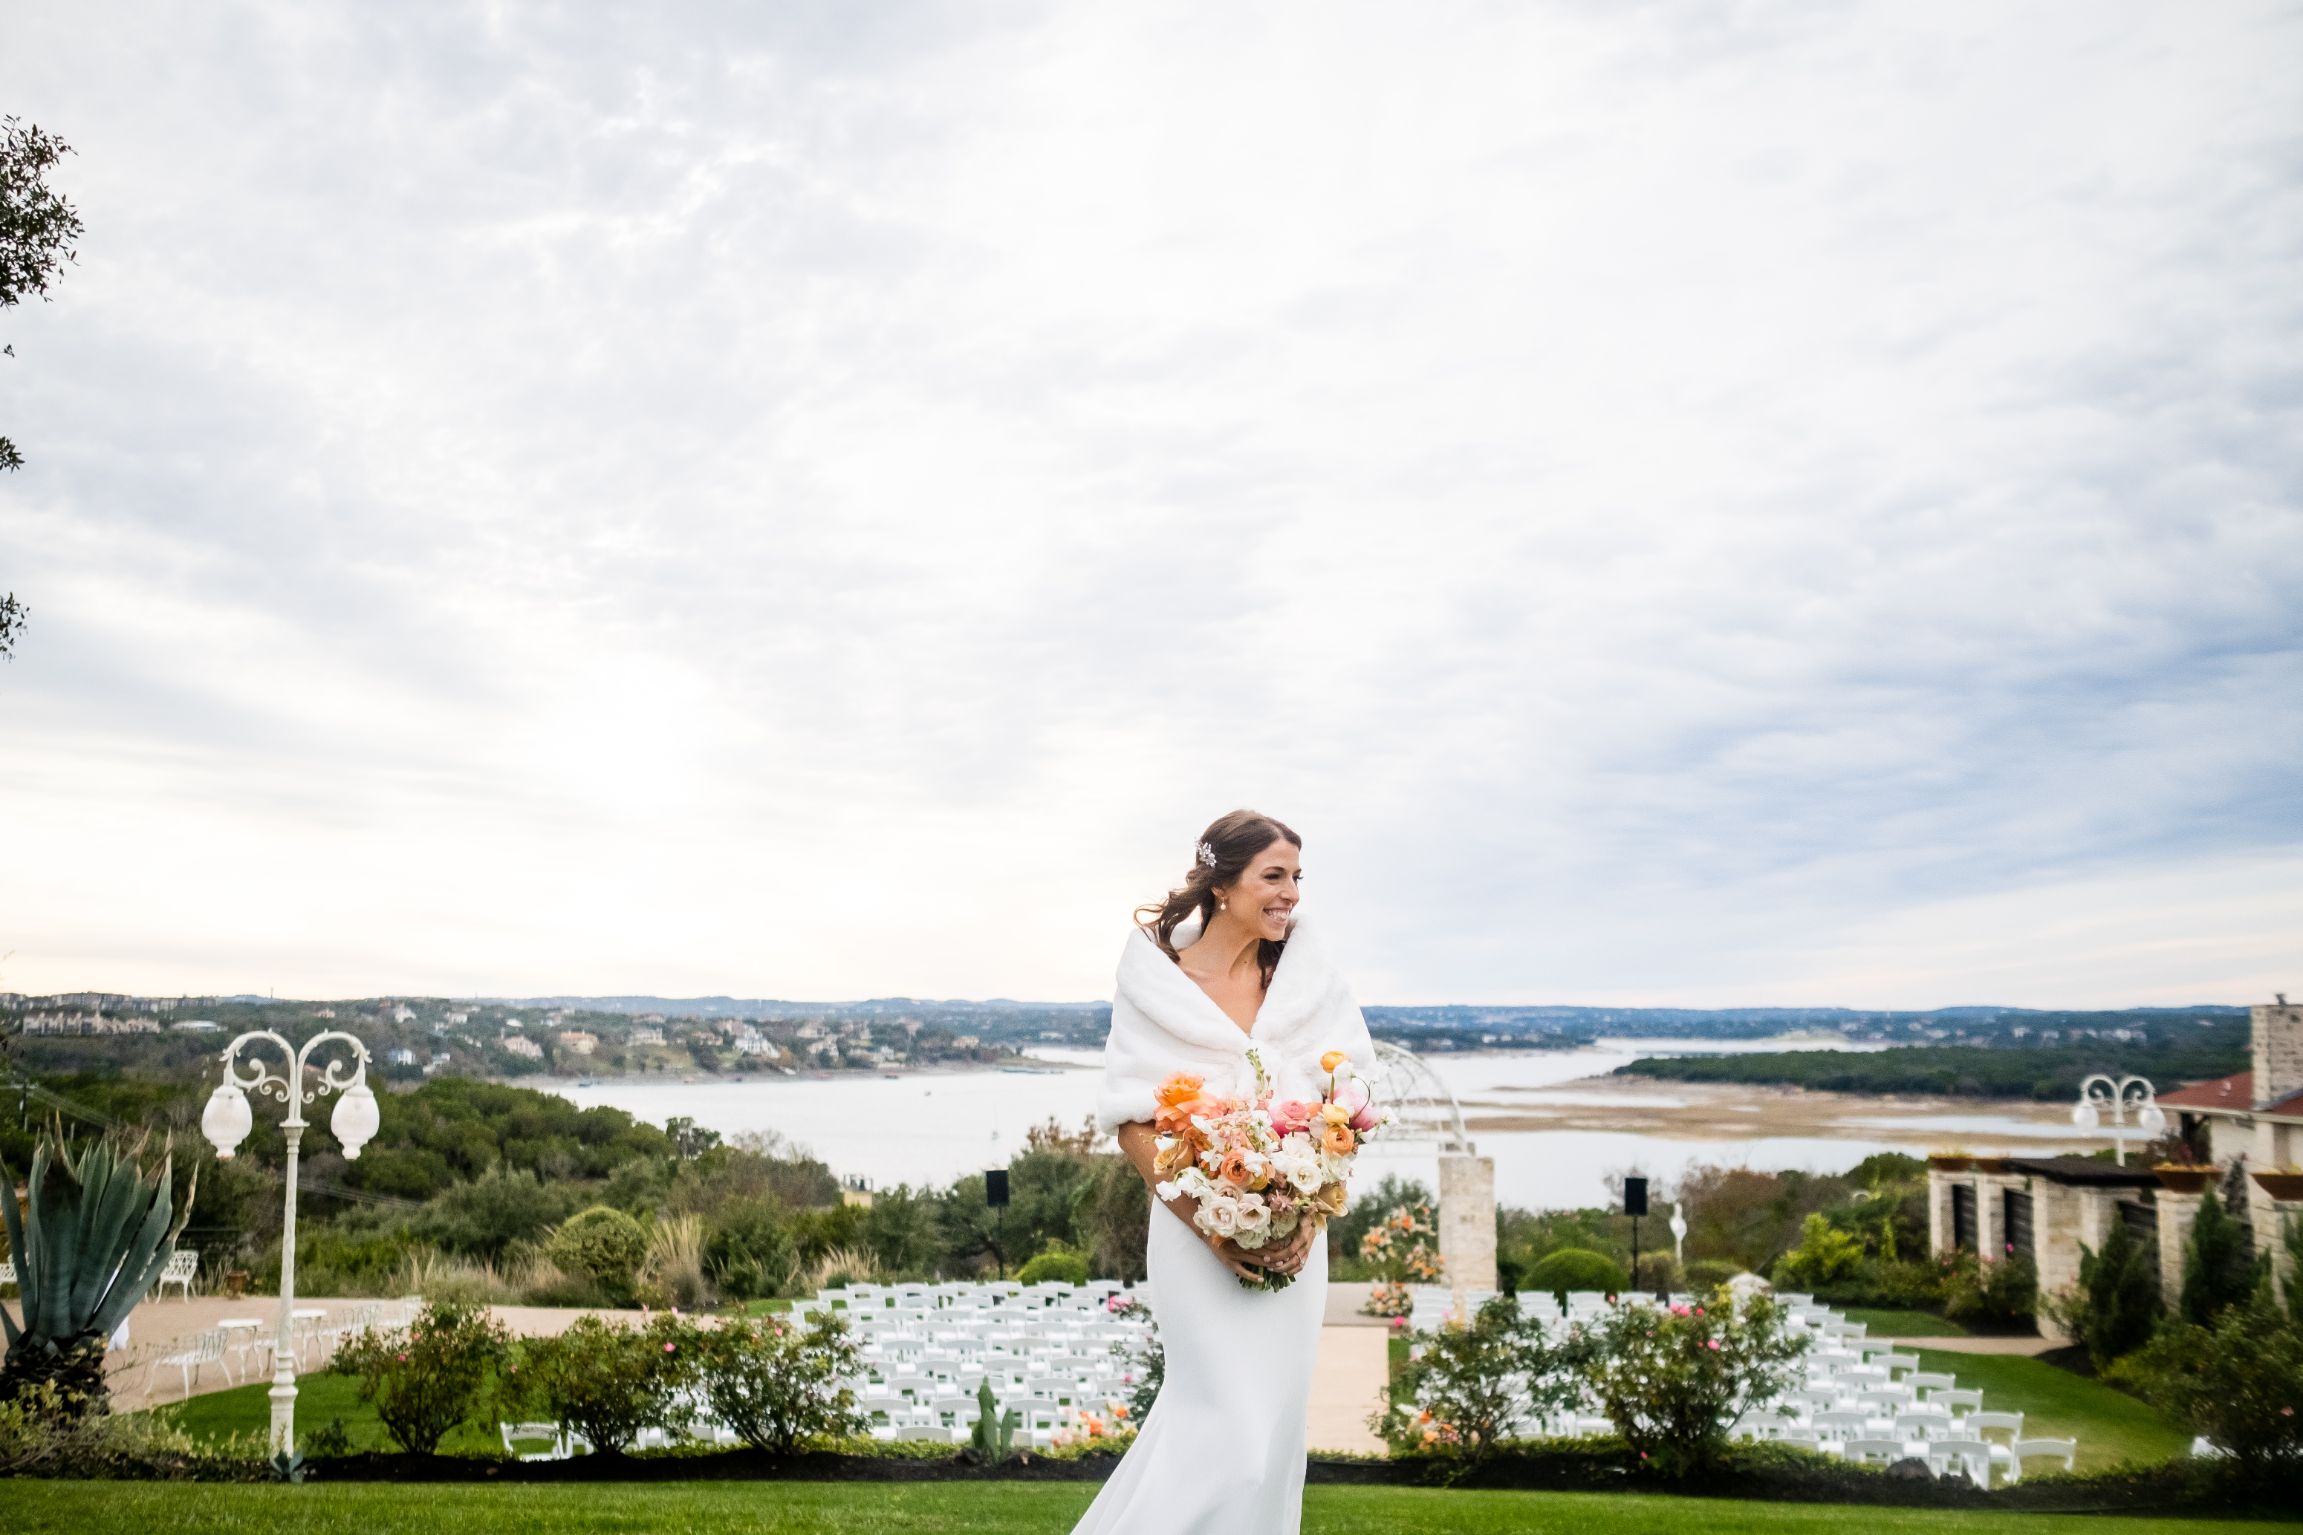 A bride wearing a white dress and fur cover smiles while holding a bouquet of pink and orange flowers. Lake Travis is seen in the distance.